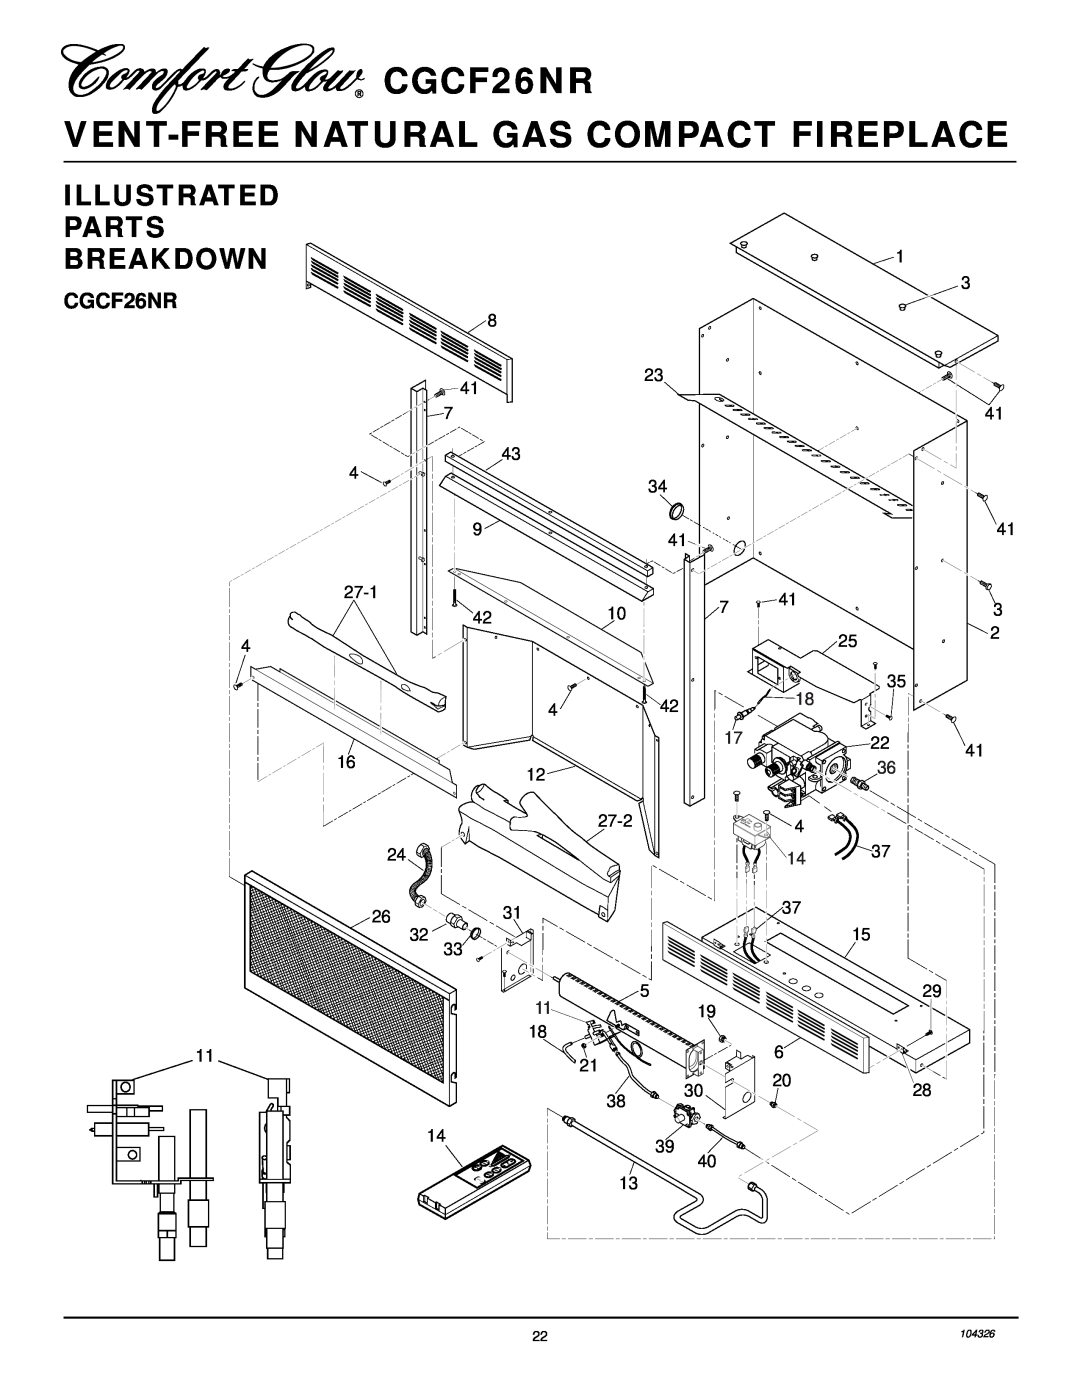 Desa installation manual Illustrated Parts Breakdown, CGCF26NR VENT-FREENATURAL GAS COMPACT FIREPLACE 